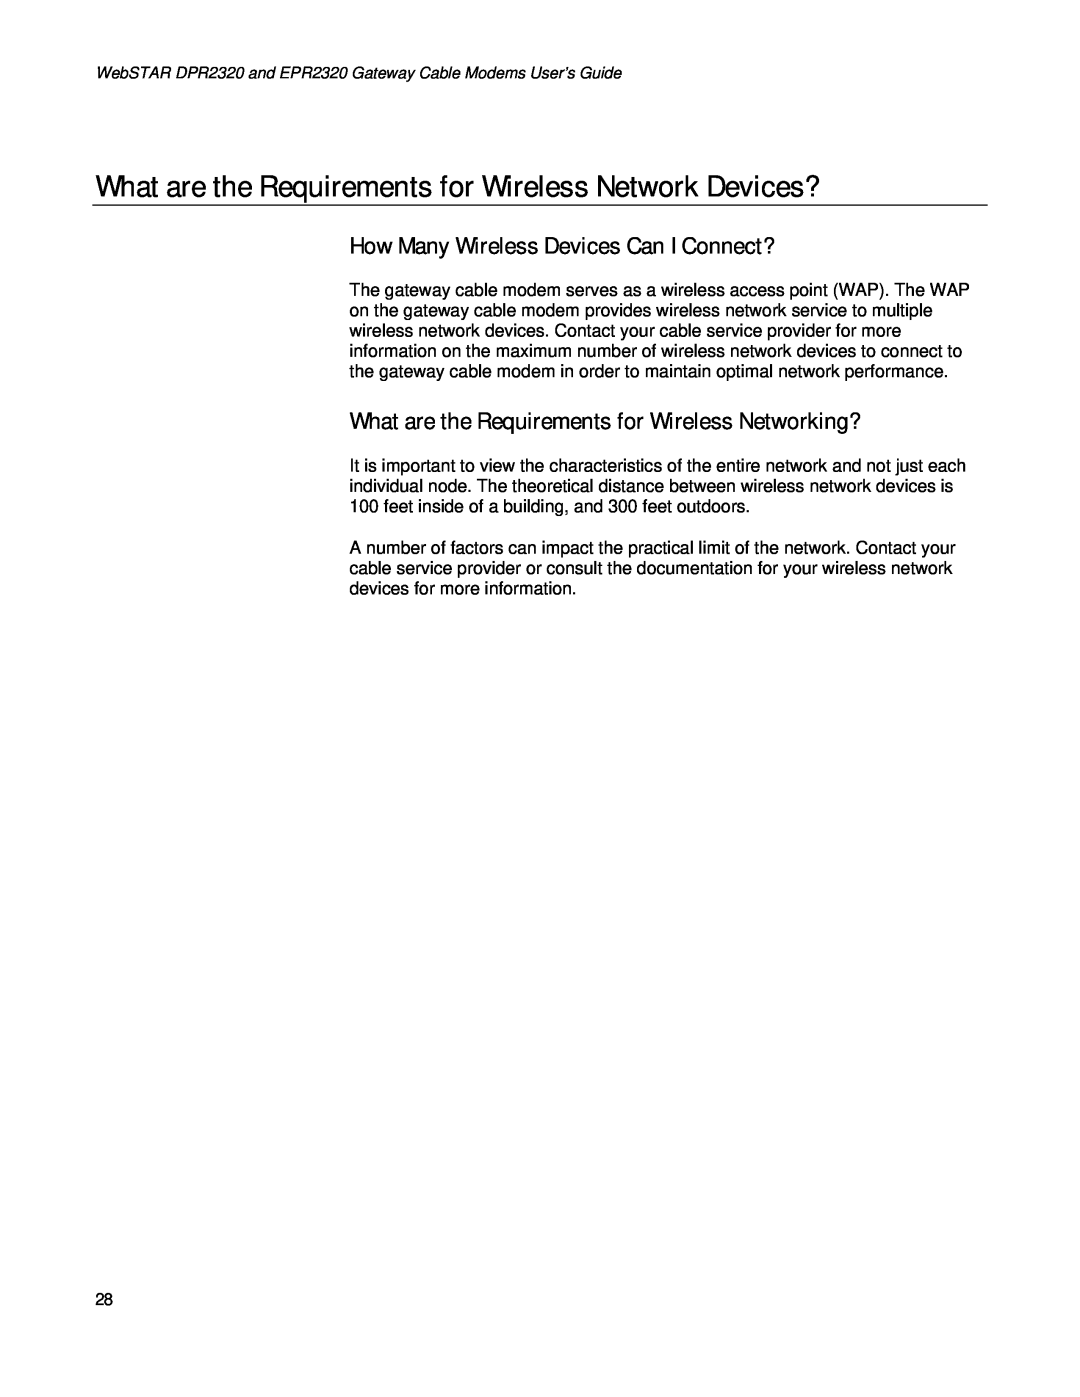 Apple DPR2320TM manual What are the Requirements for Wireless Network Devices?, How Many Wireless Devices Can I Connect? 